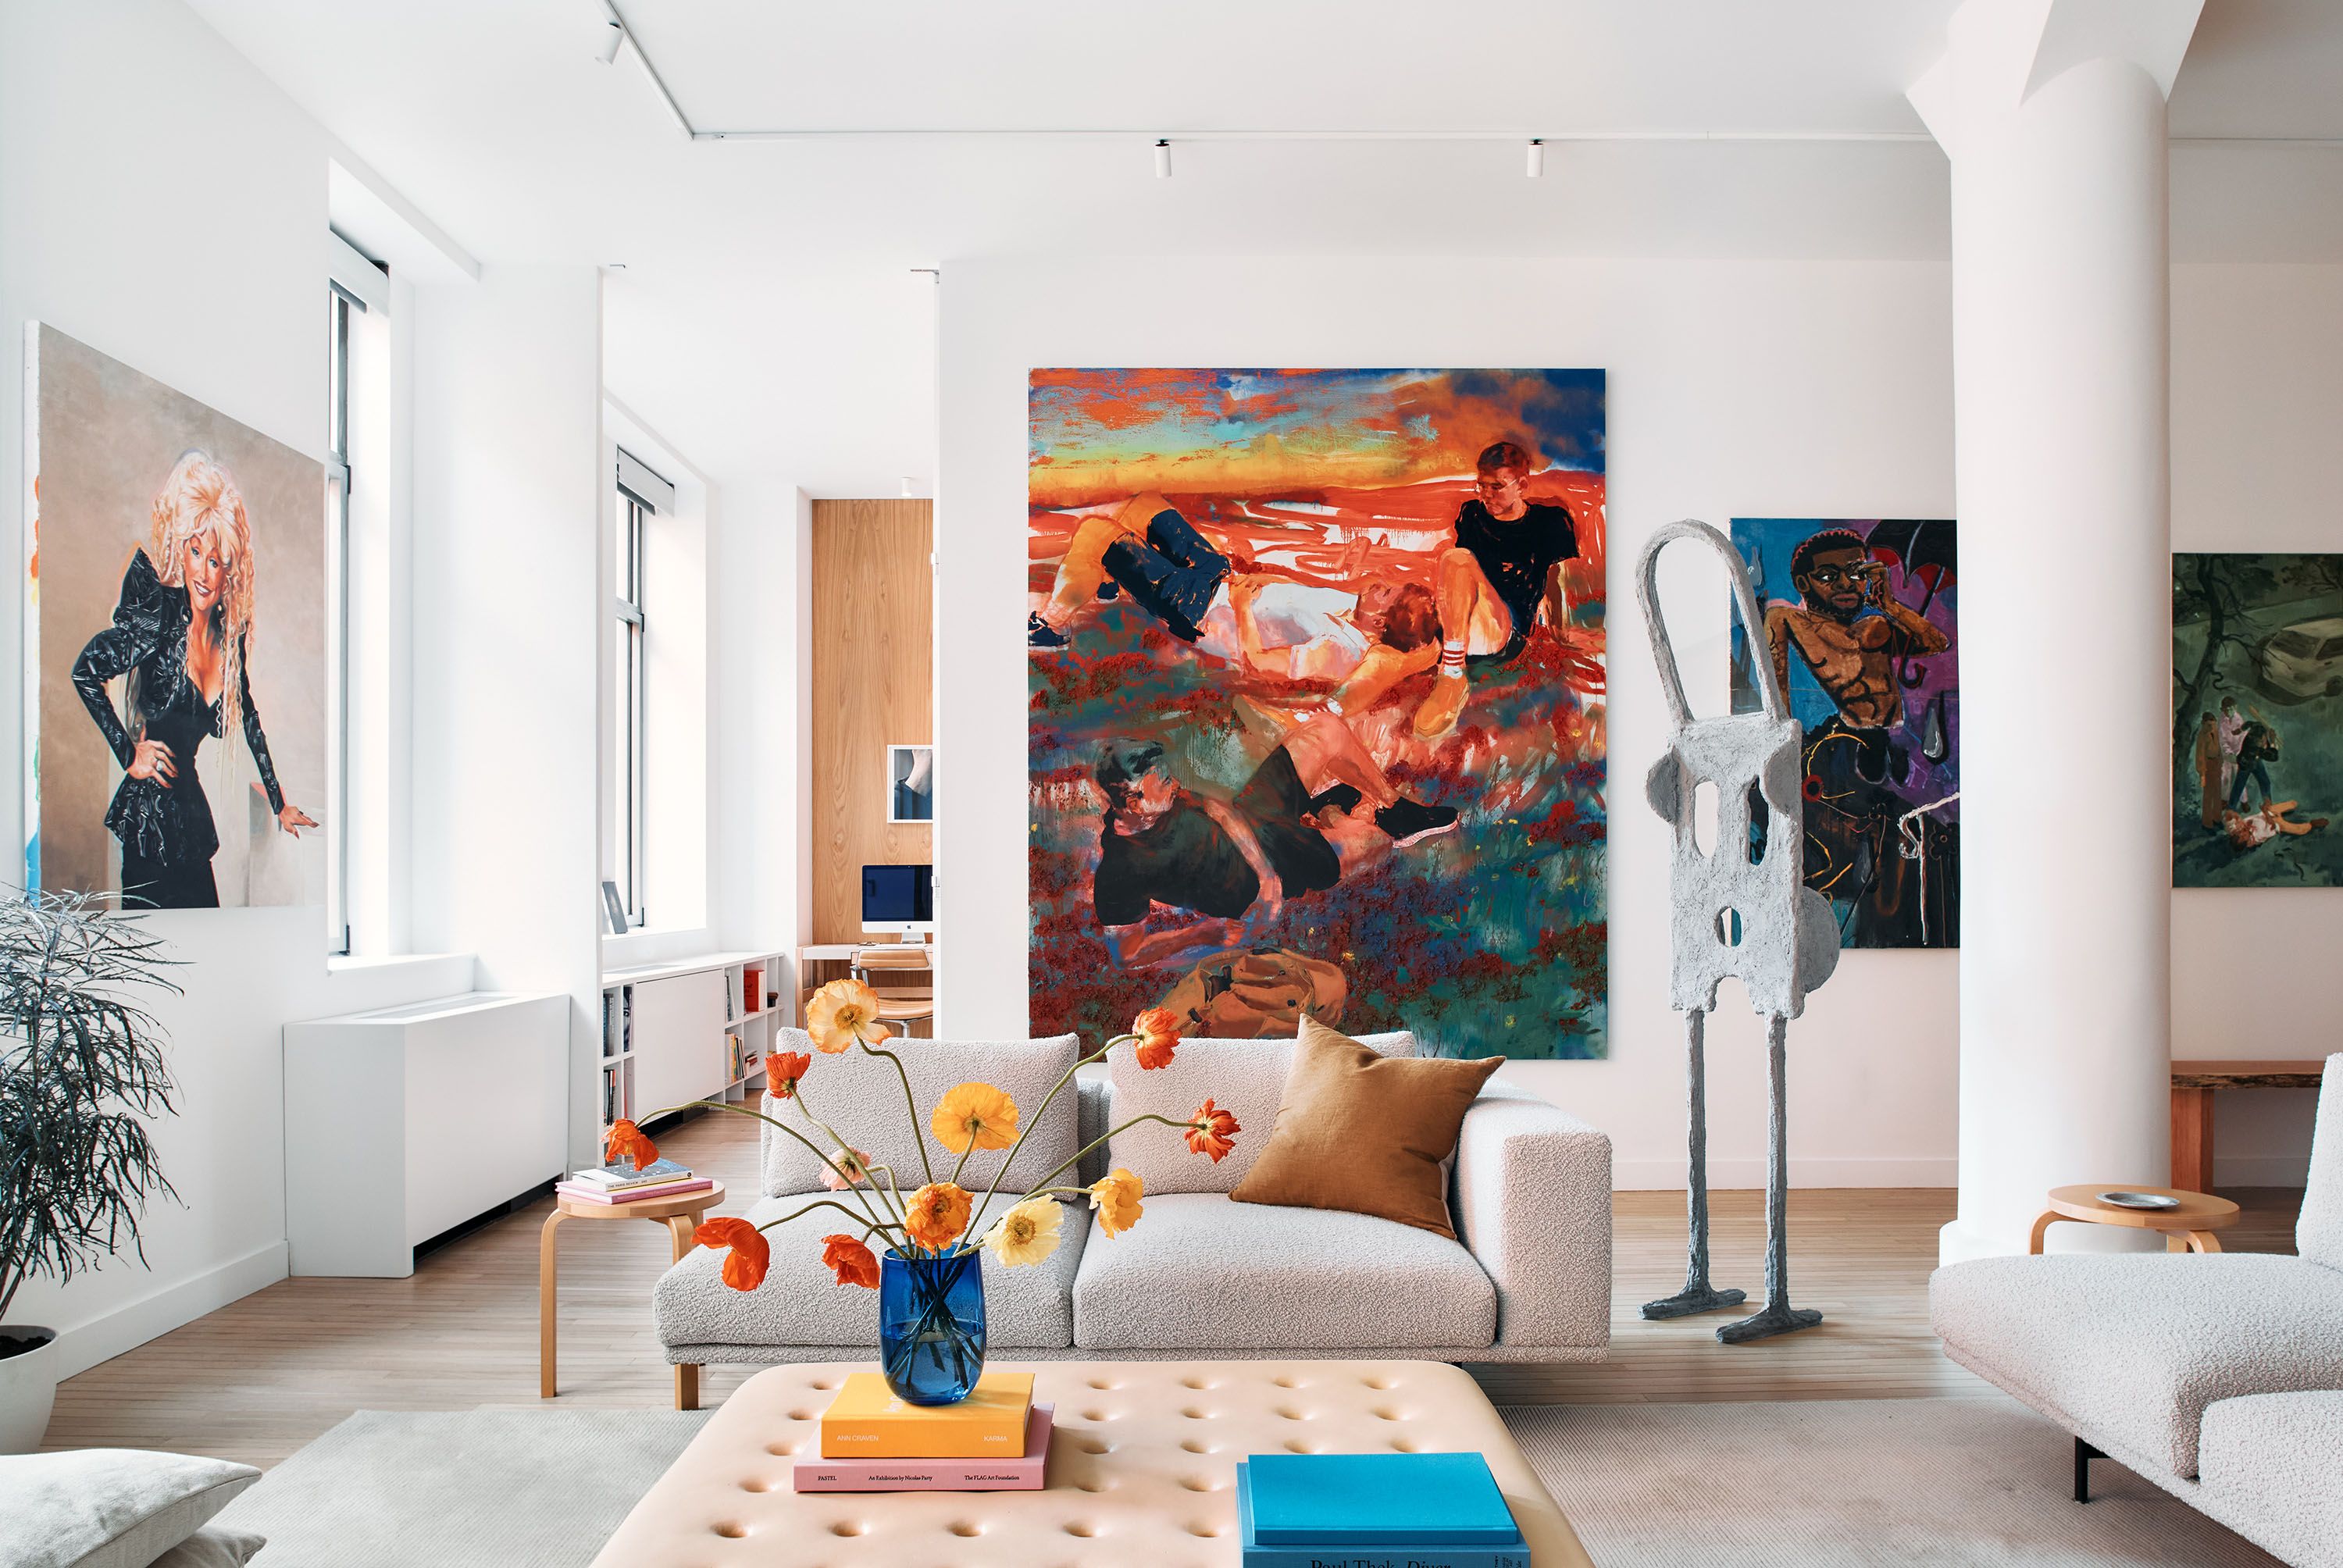 With 100 Artworks on Display, This New York Loft Takes Wall Real ...